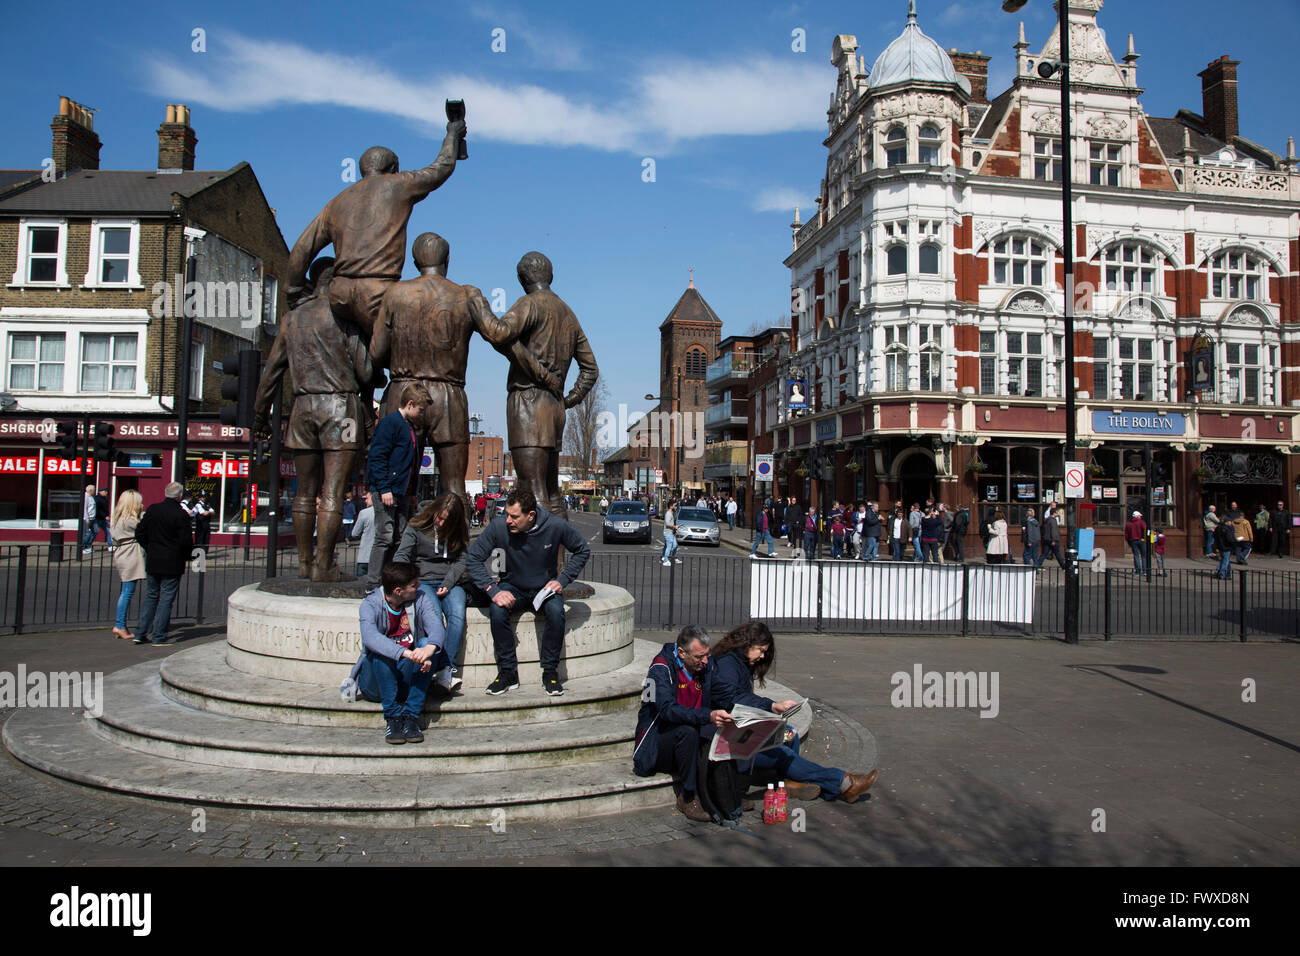 Fans sitting at the World Cup statue on Barking Road, with the Boleyn pub, a regular gathering place for home fans, in the background before West Ham United hosted Crystal Palace in a Barclays Premier League match at the Boleyn Ground. The Boleyn Ground at Upton Park was the club's home ground from 1904 until the end of the 2015-16 season when they moved into the Olympic Stadium, built for the 2012 London games, at nearby Stratford. The match ended in a 2-2 draw, watched by a near-capacity crowd of 34,857. Stock Photo